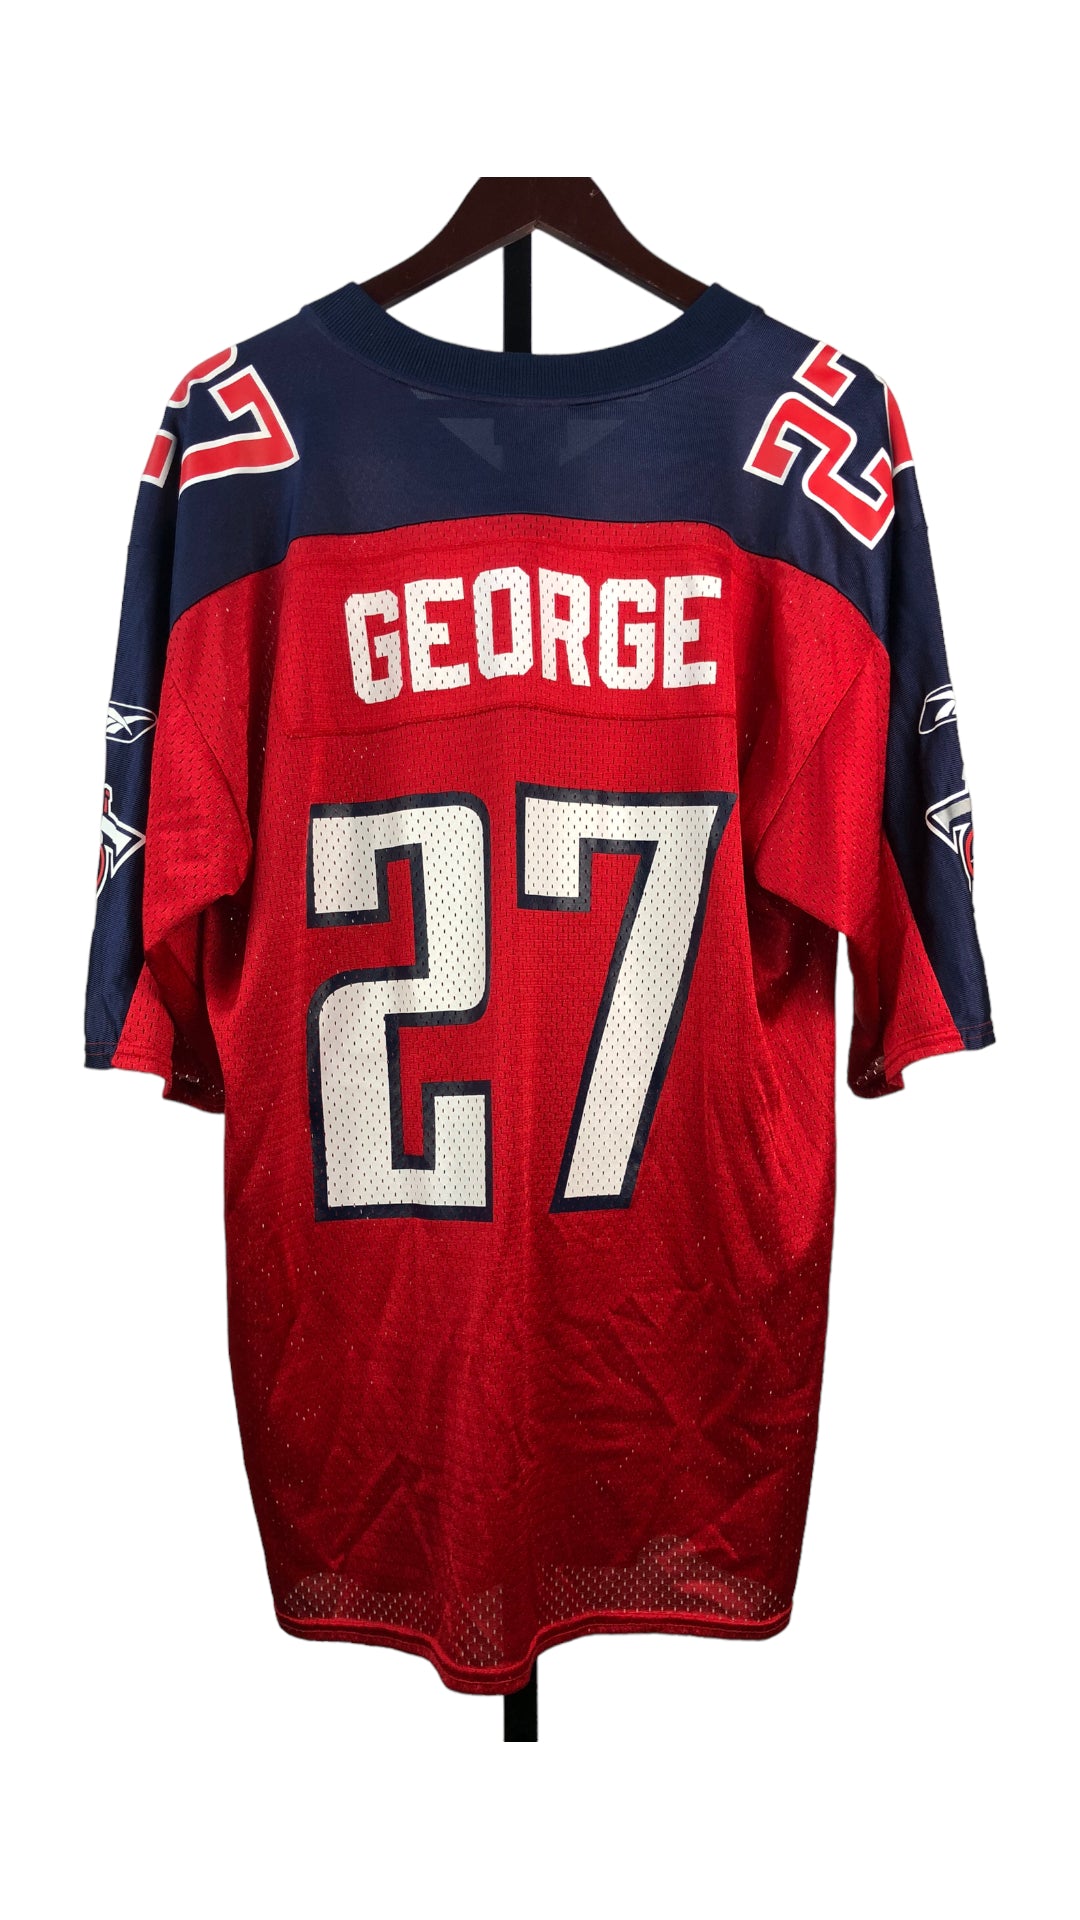 Load image into Gallery viewer, VTG Eddie George Tennessee Titans Jersey Sz M
